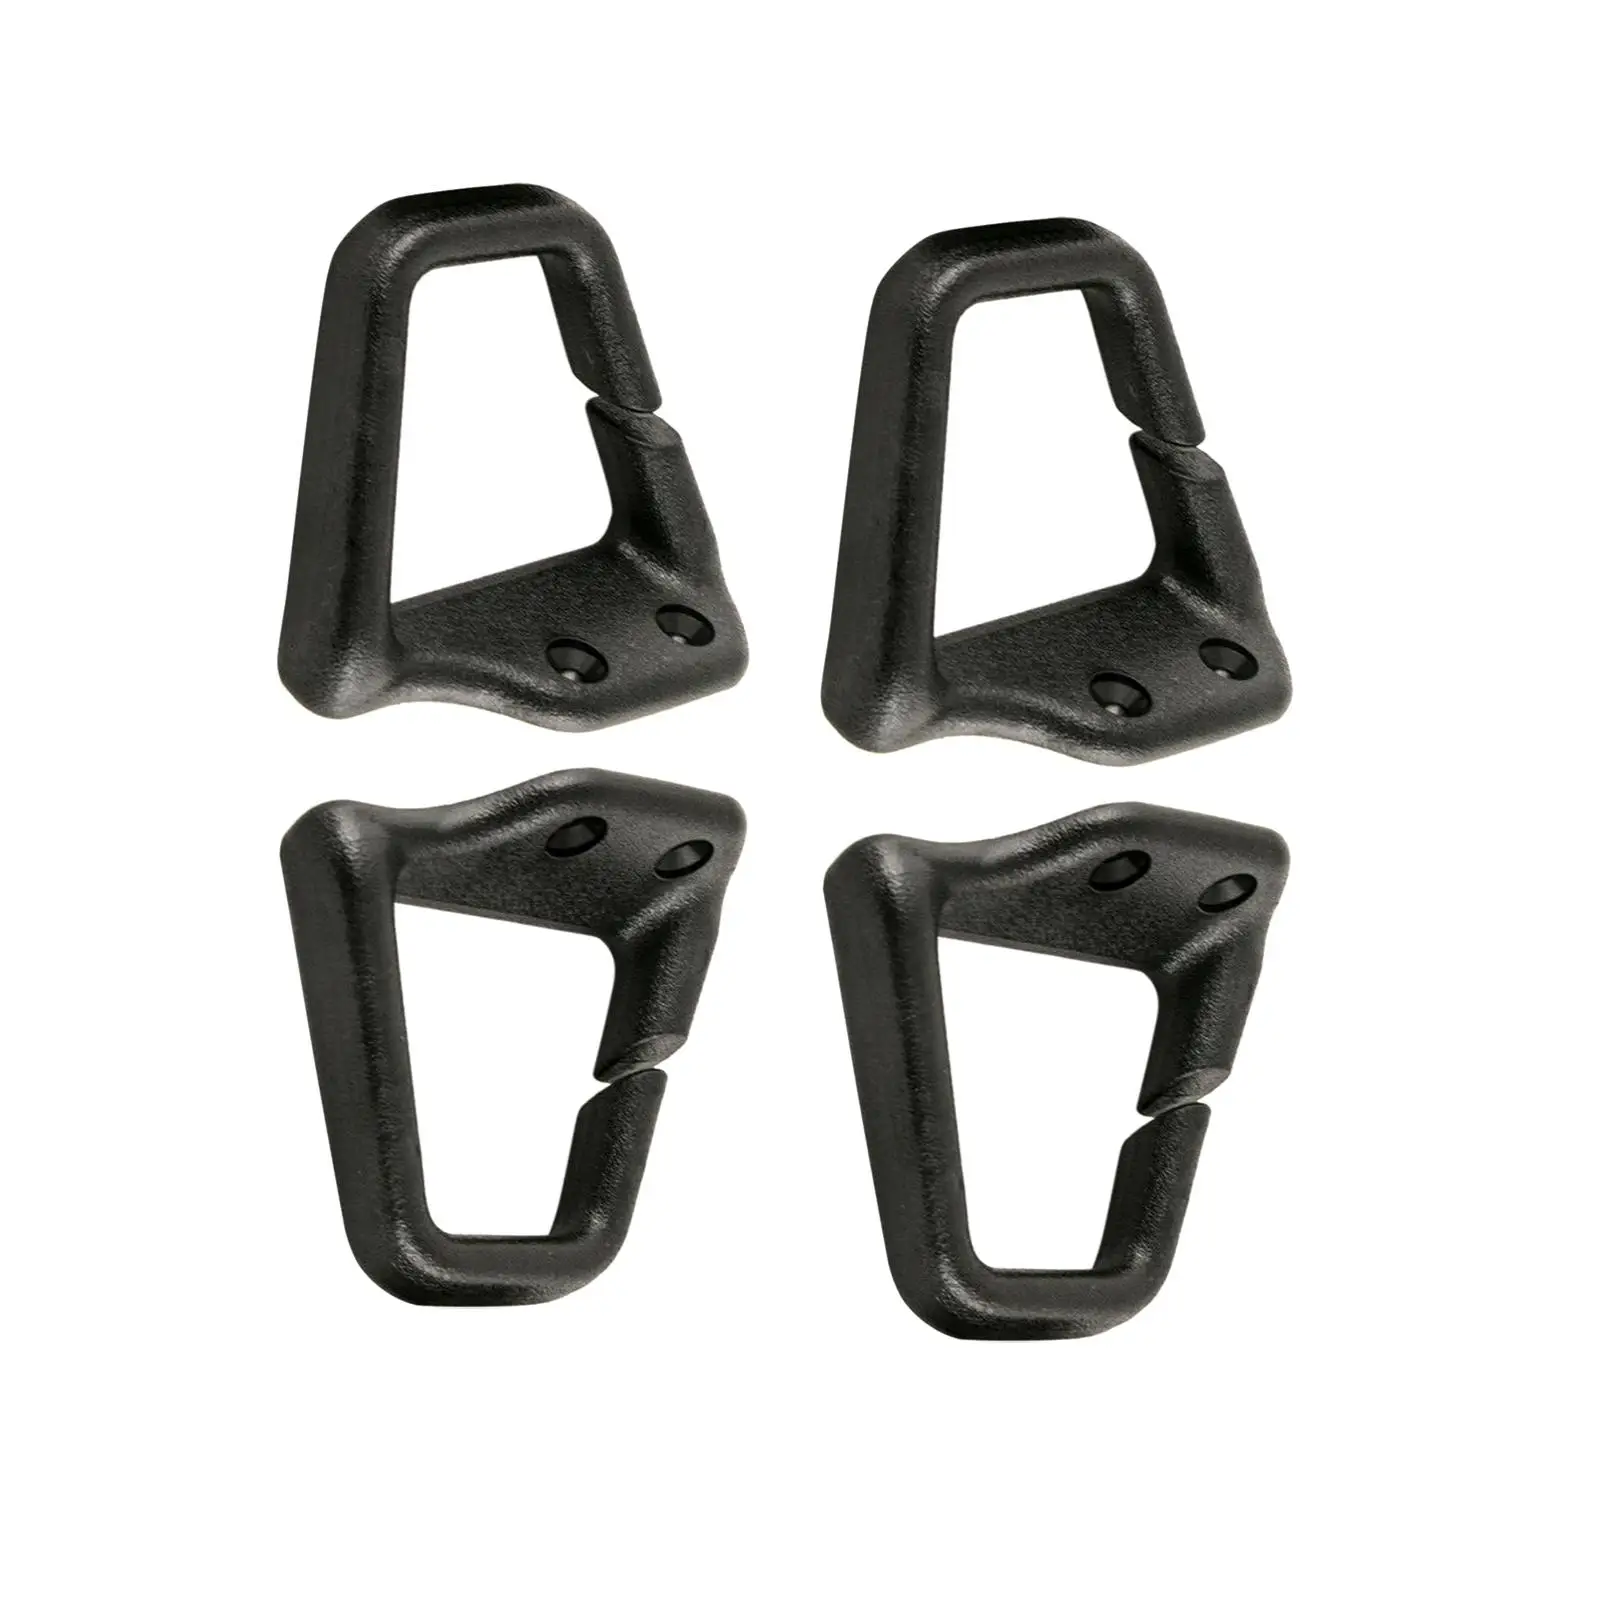 2x 2Pcs  Belt Guide Clips Buckle Stopper Black  Guide Loops for   93-02 HT7203 HT7202 16817202 16817203